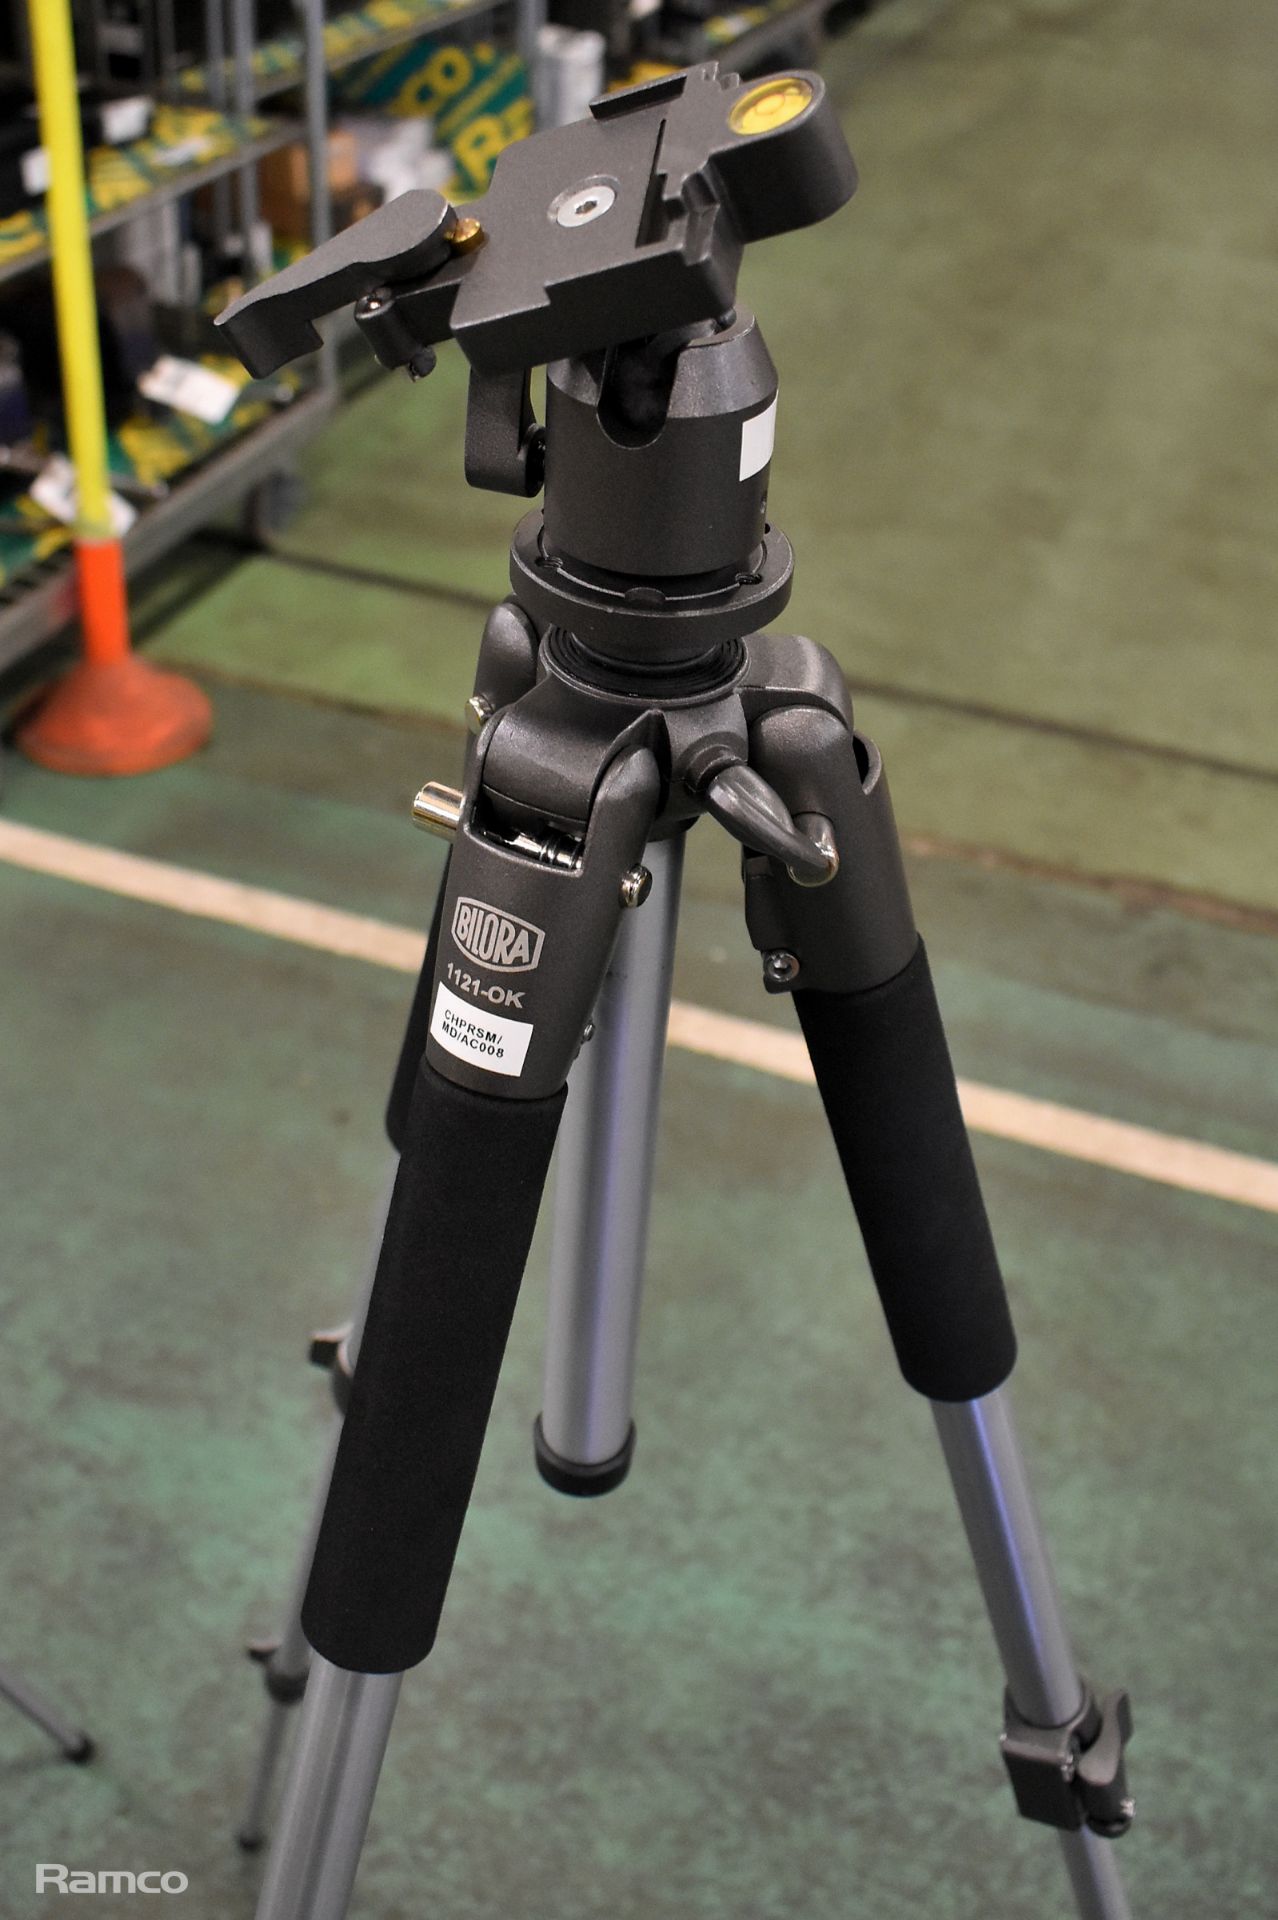 3x Bilora 1121-OK 59-143cm tripods with carry case - Image 6 of 7